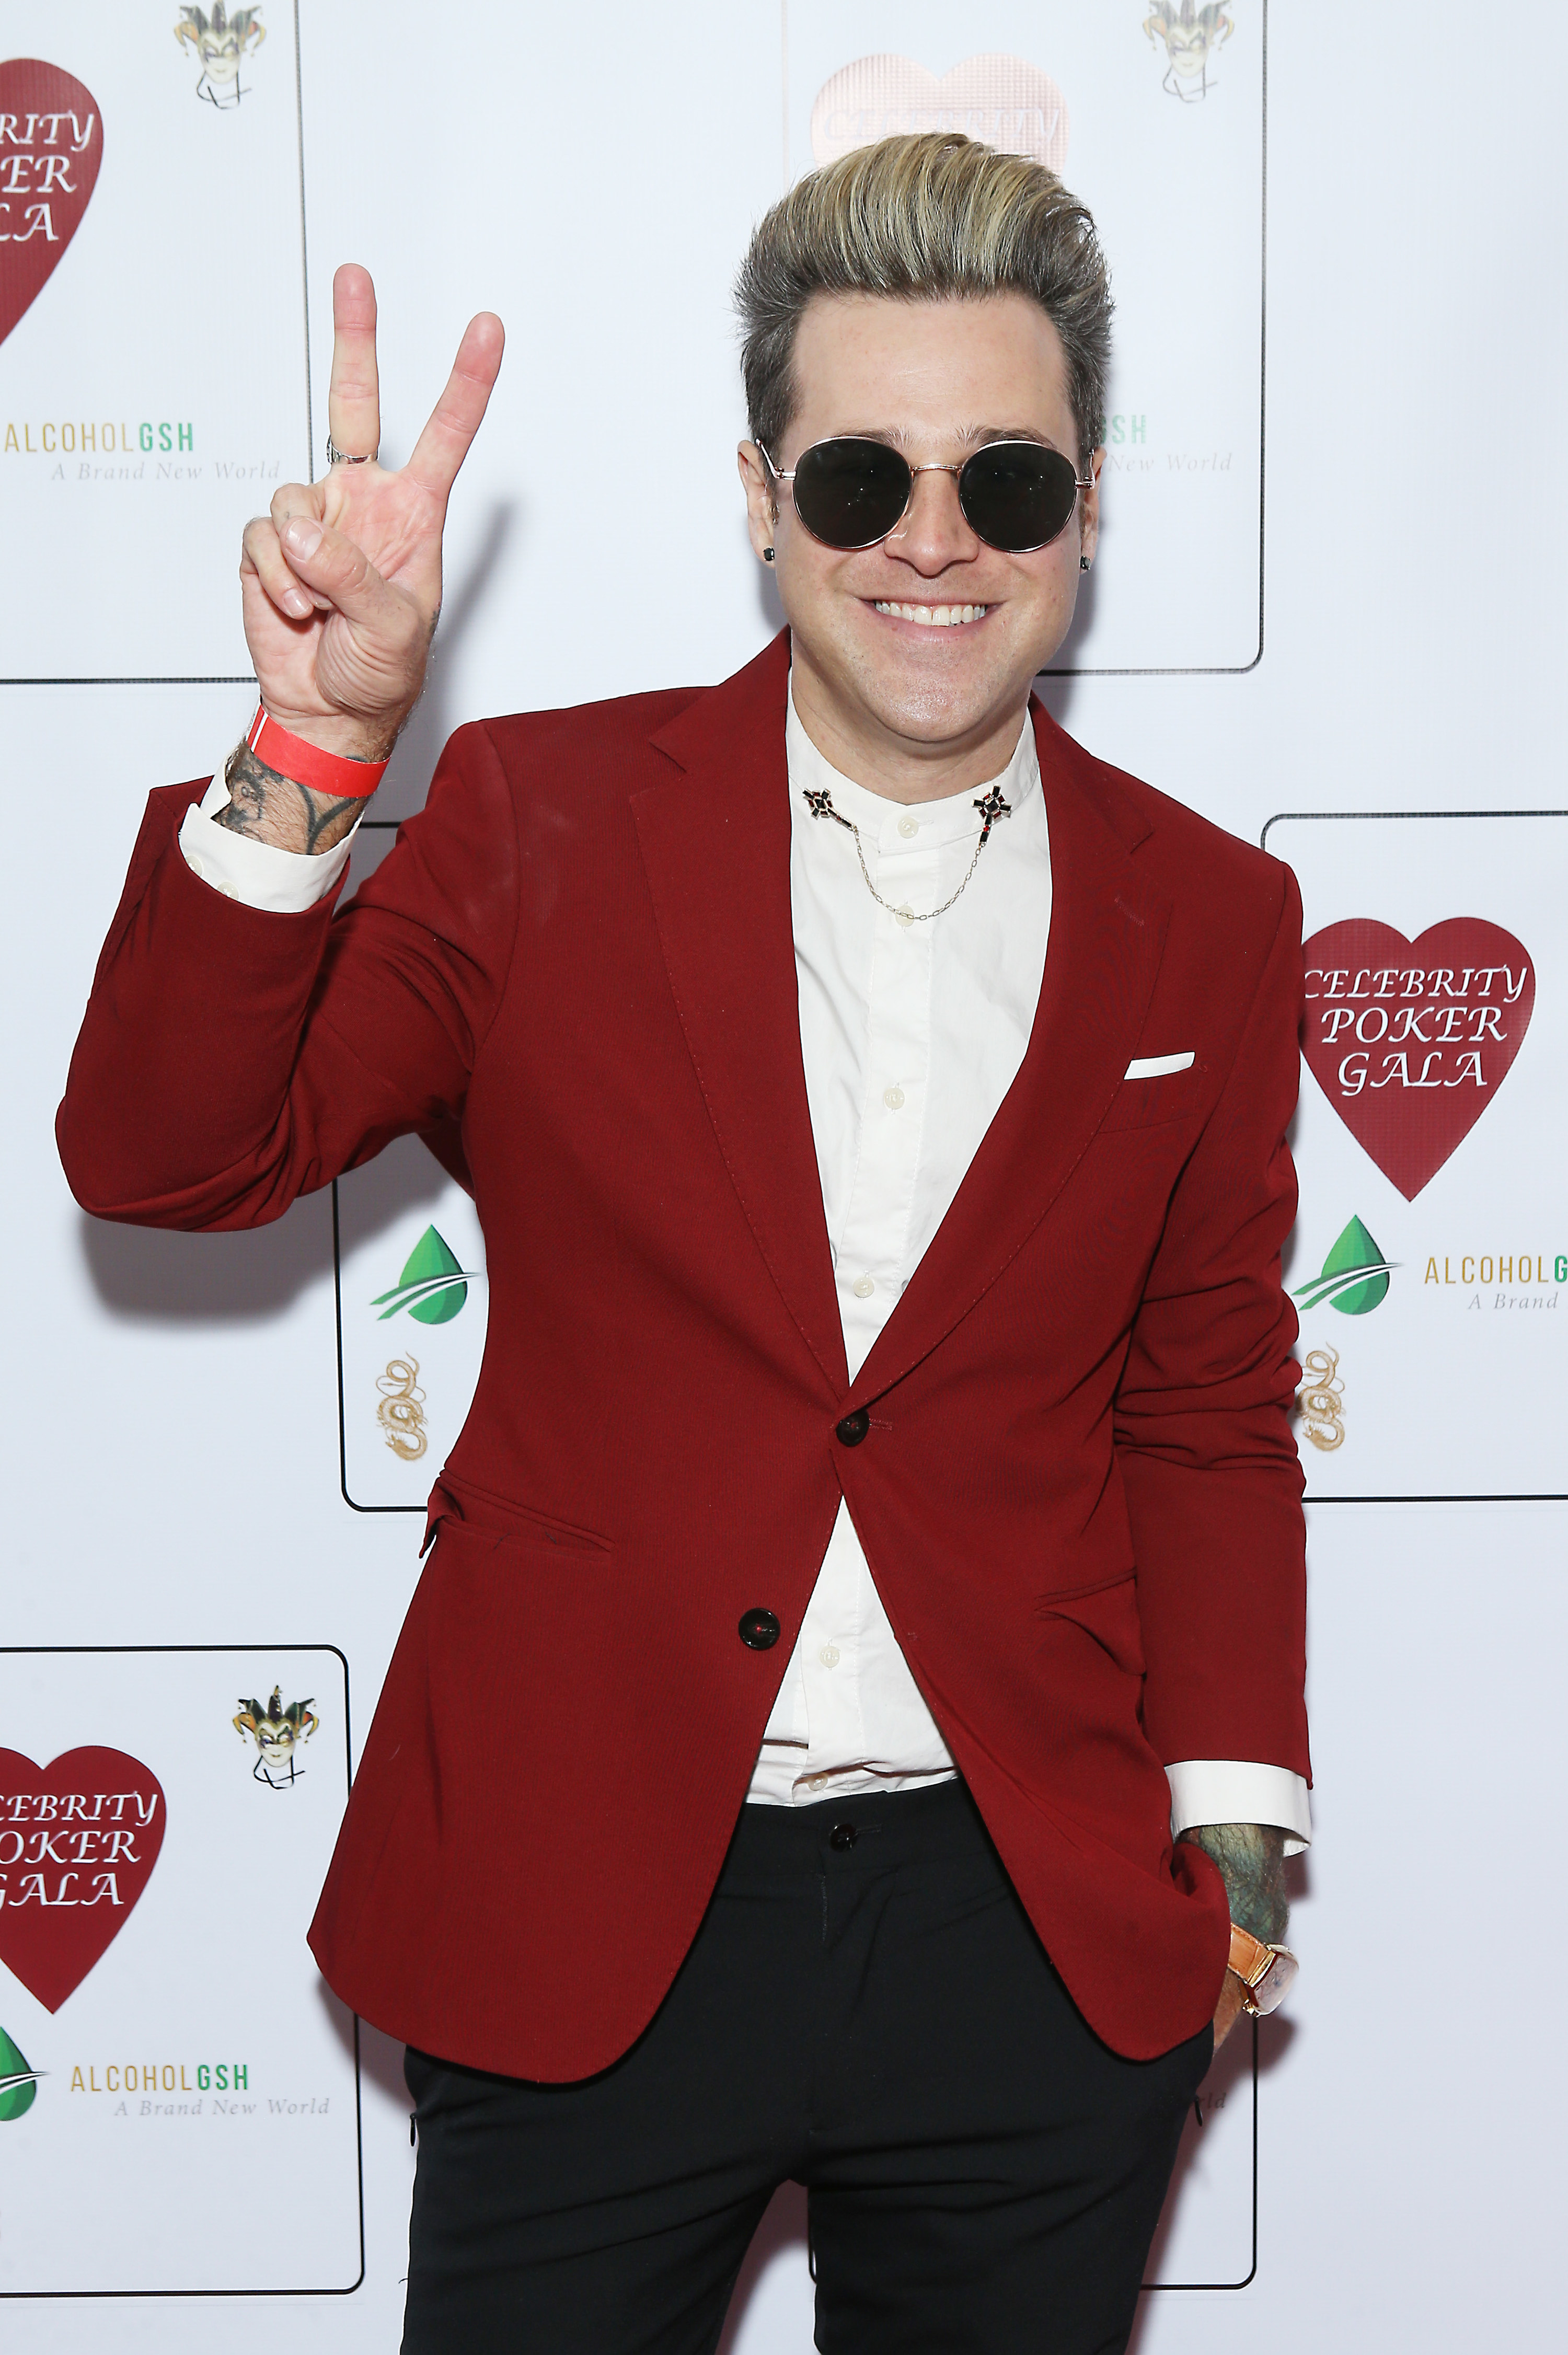 Ryan Cabrera wearing a red suit jacket and round sunglasses at the celebrity poker gala